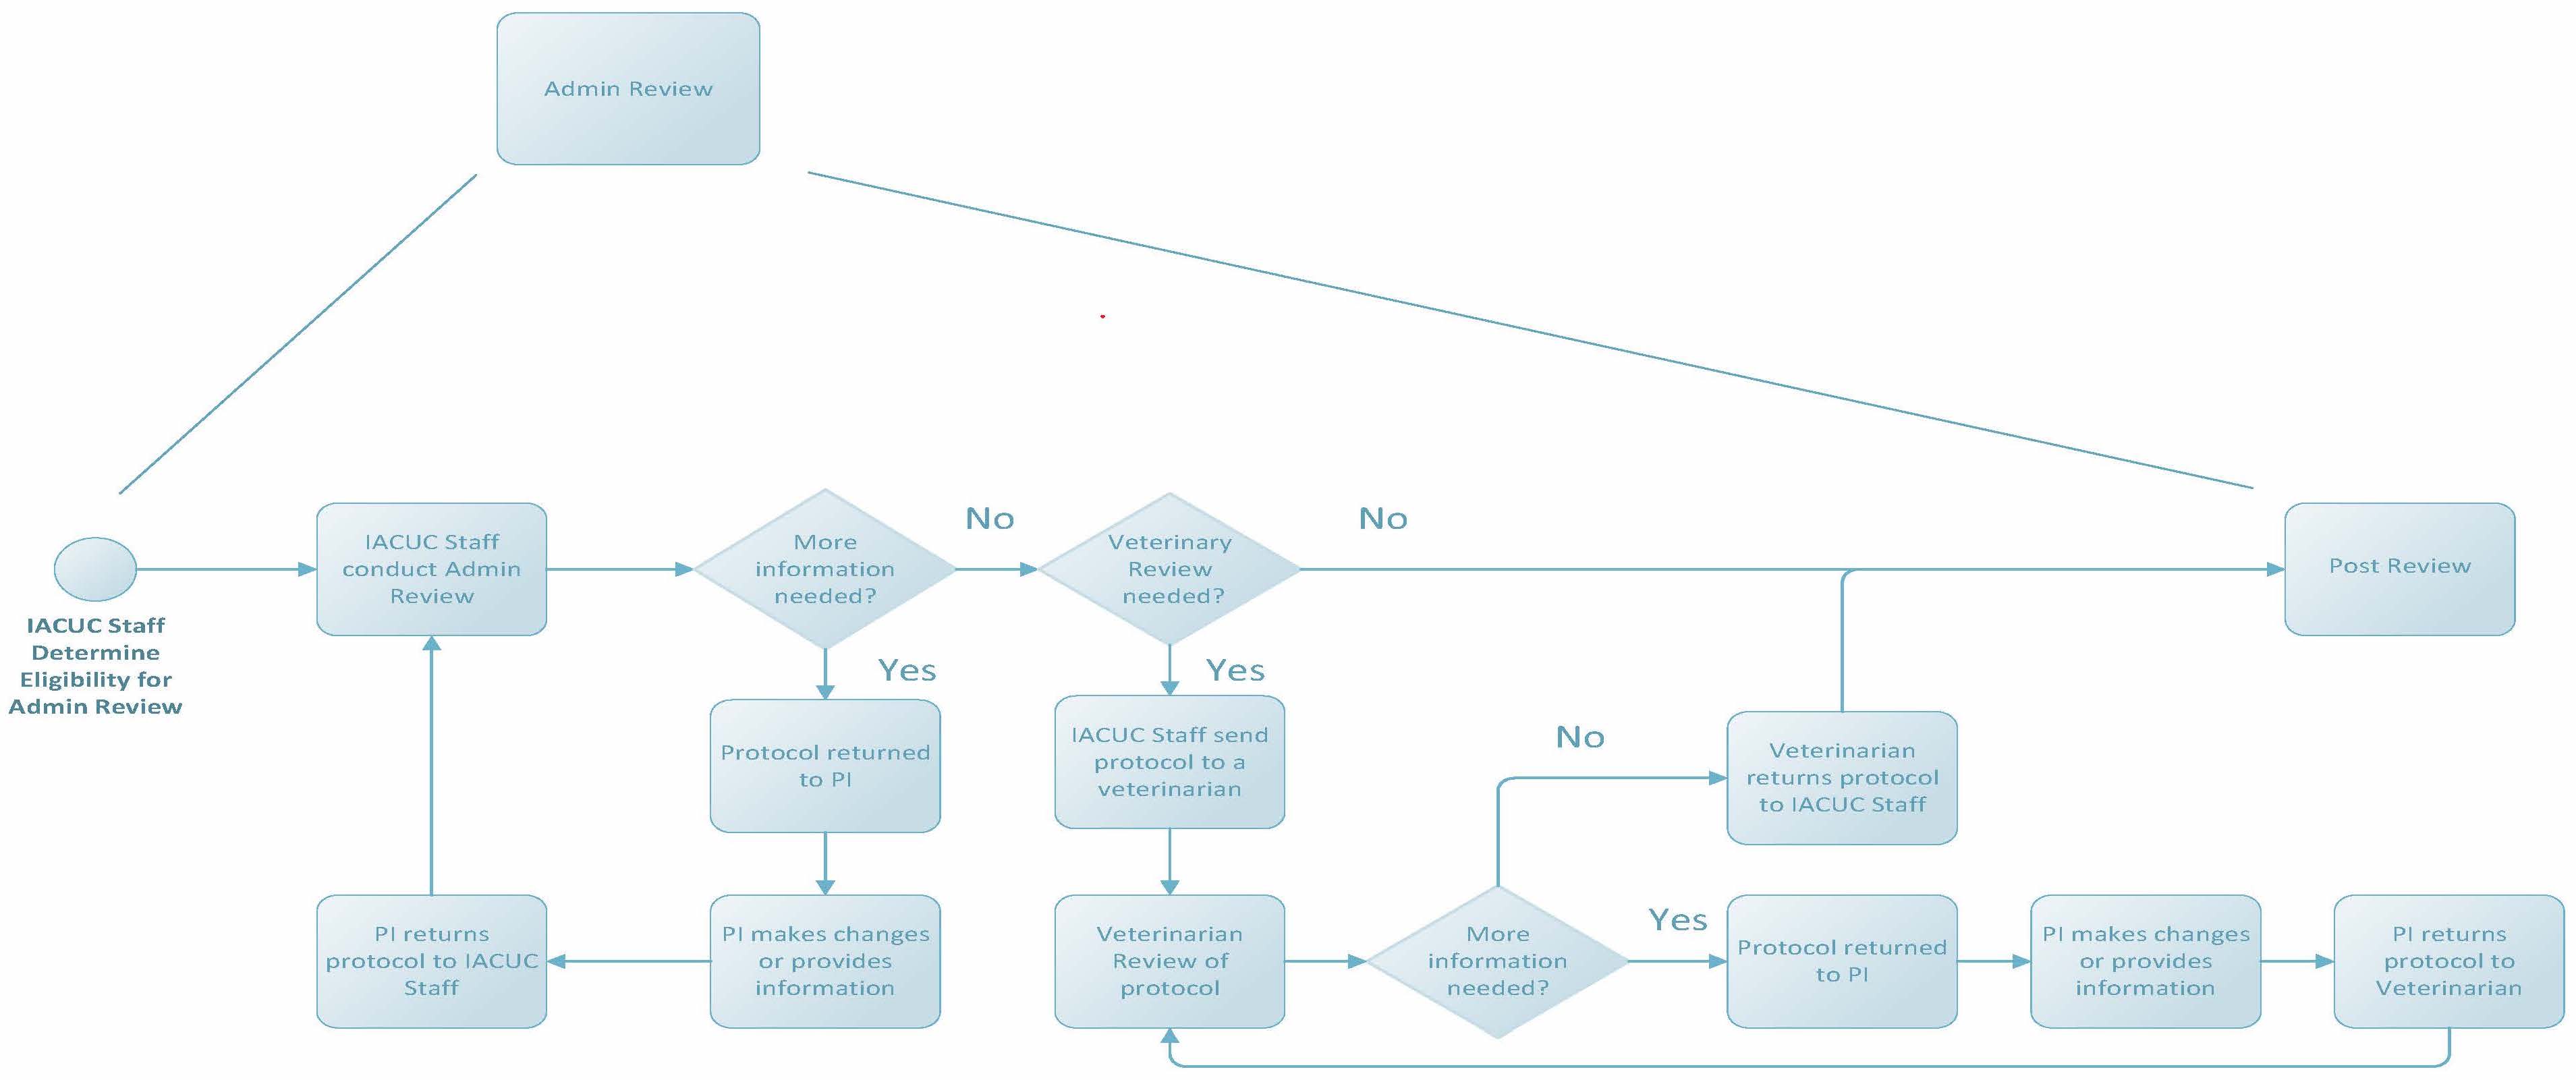 IACUC Review Process Map - Admin Review.jpg